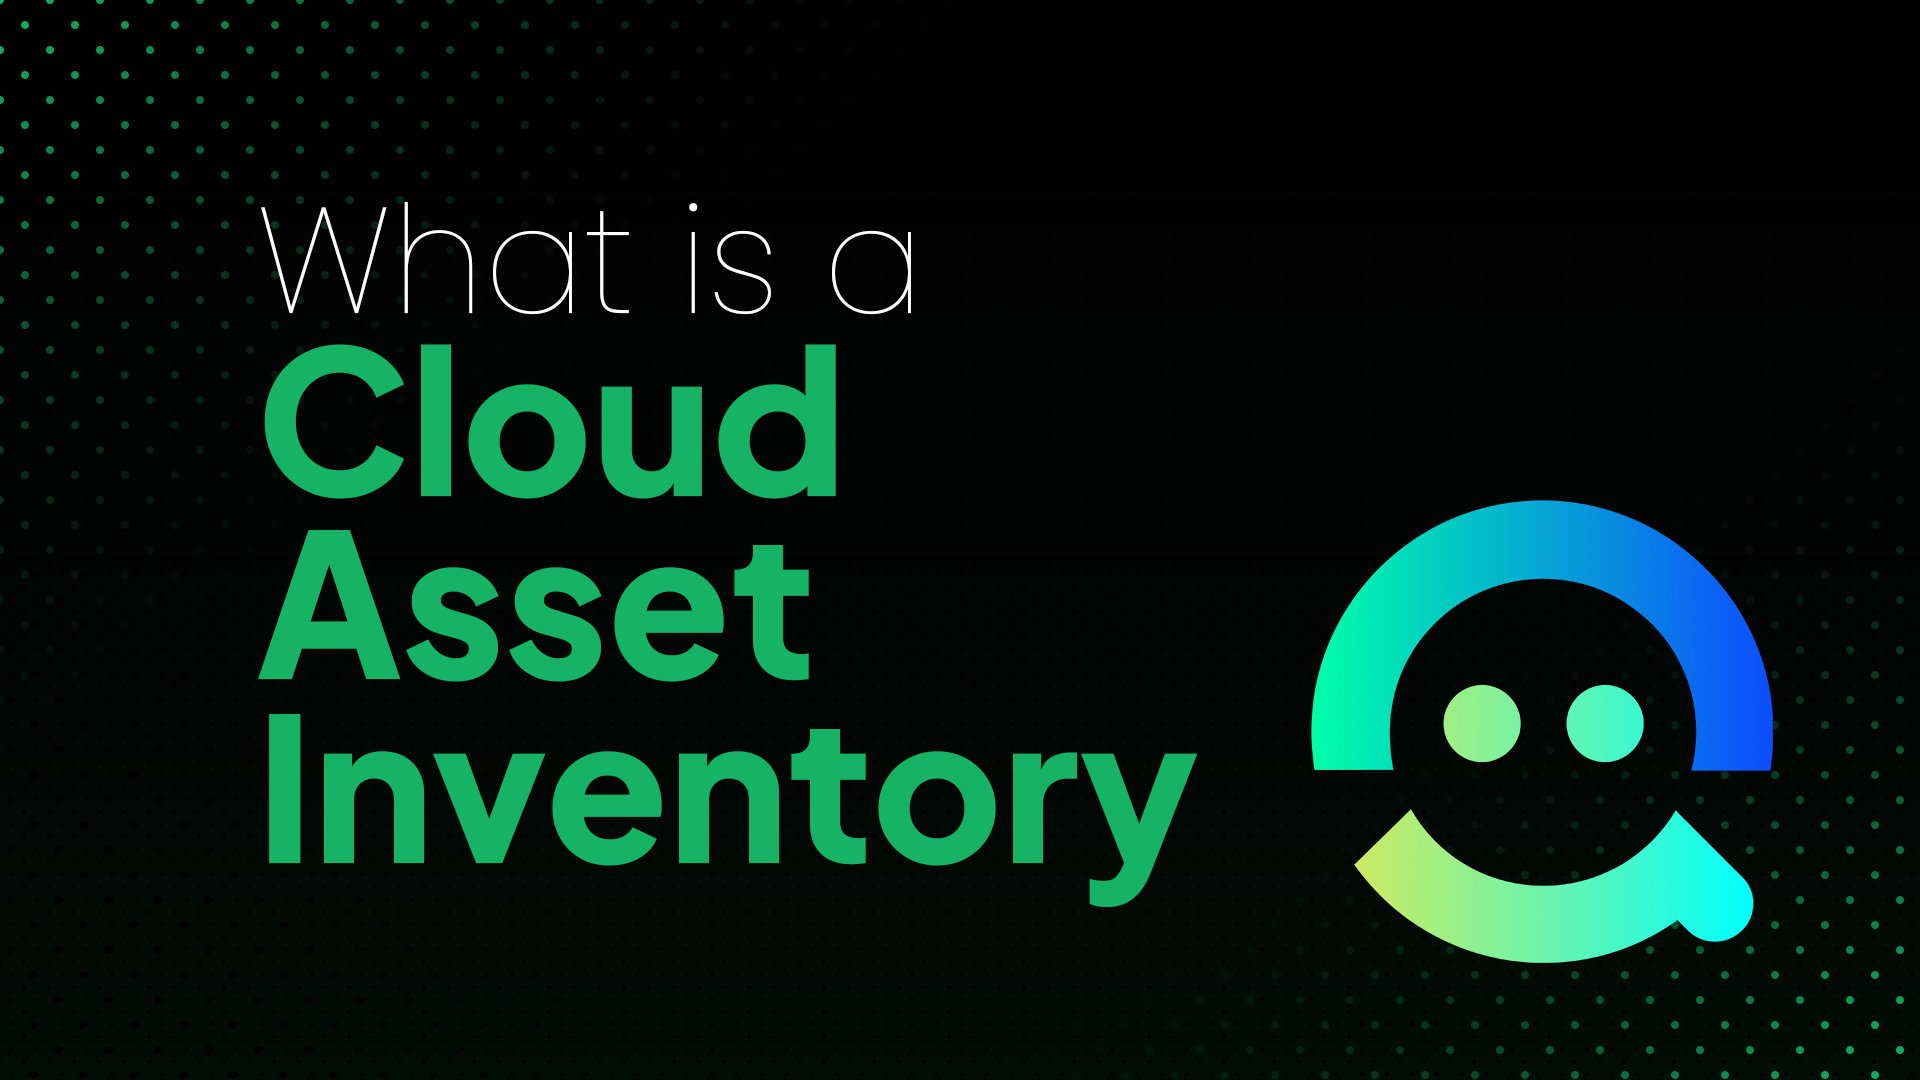 Header Image: What is a Cloud Asset Inventory